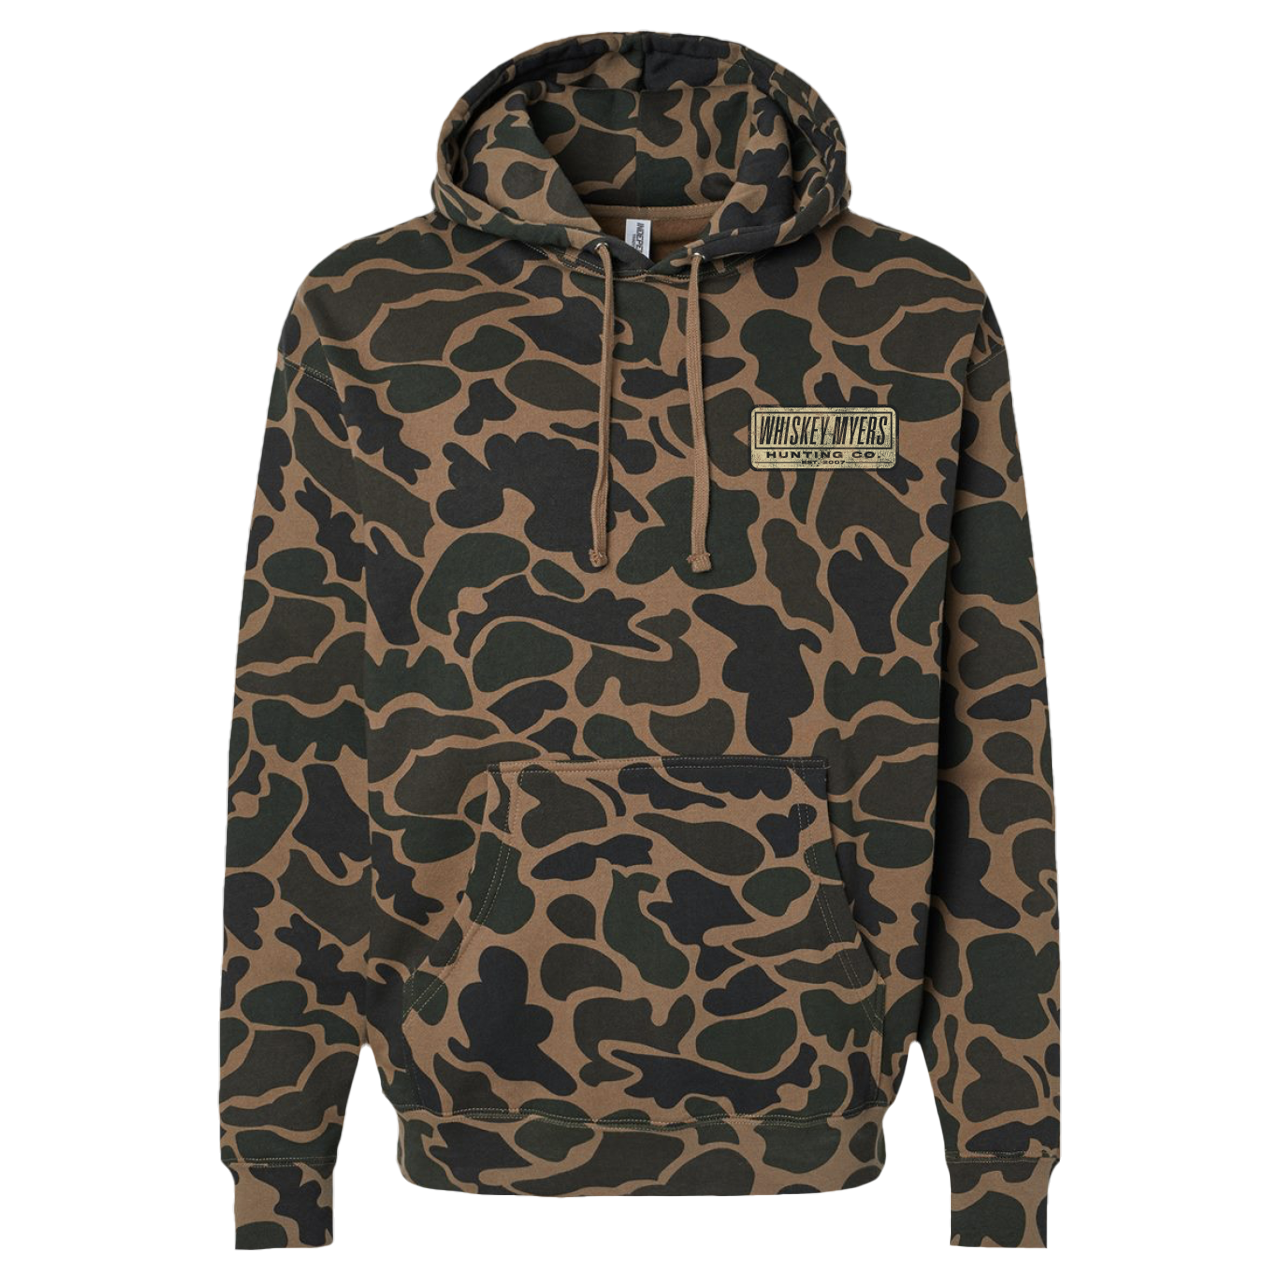 Hunting Co. Hoodie – Whiskey Myers Official Merchandise